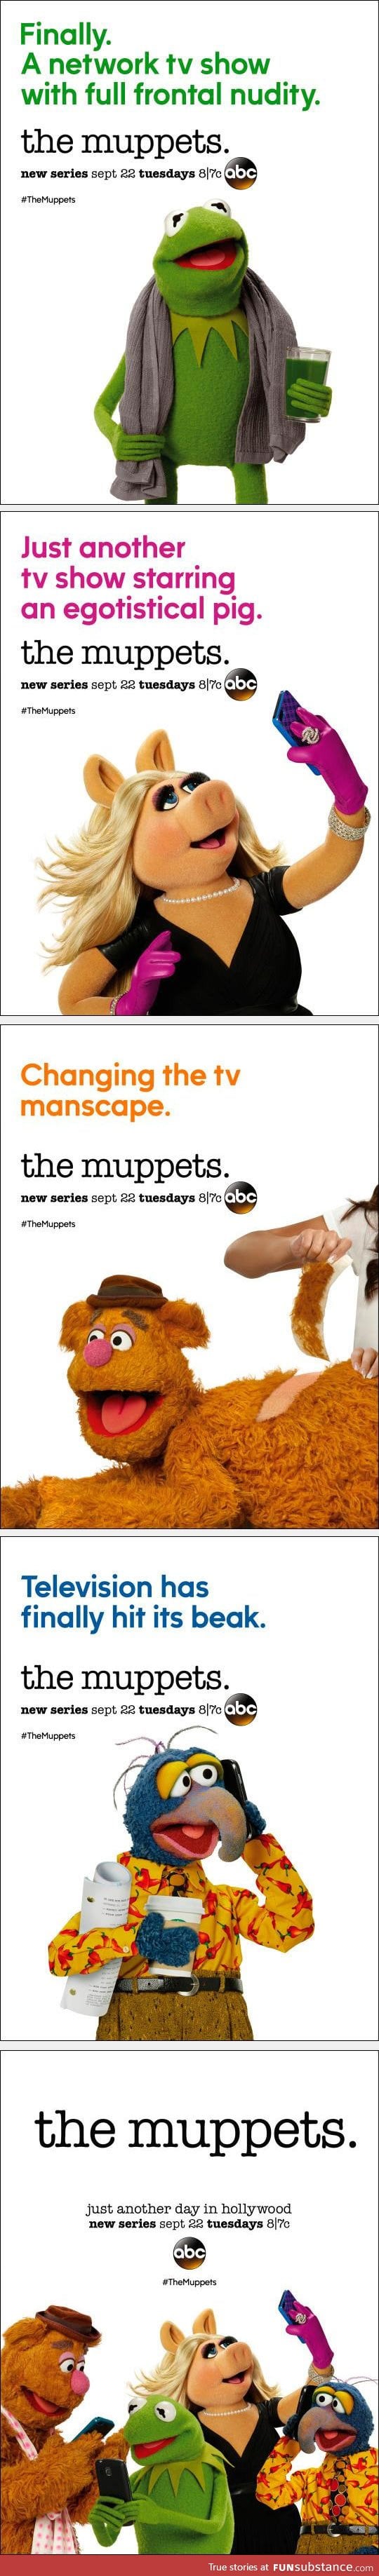 The new posters for the muppets are so funny